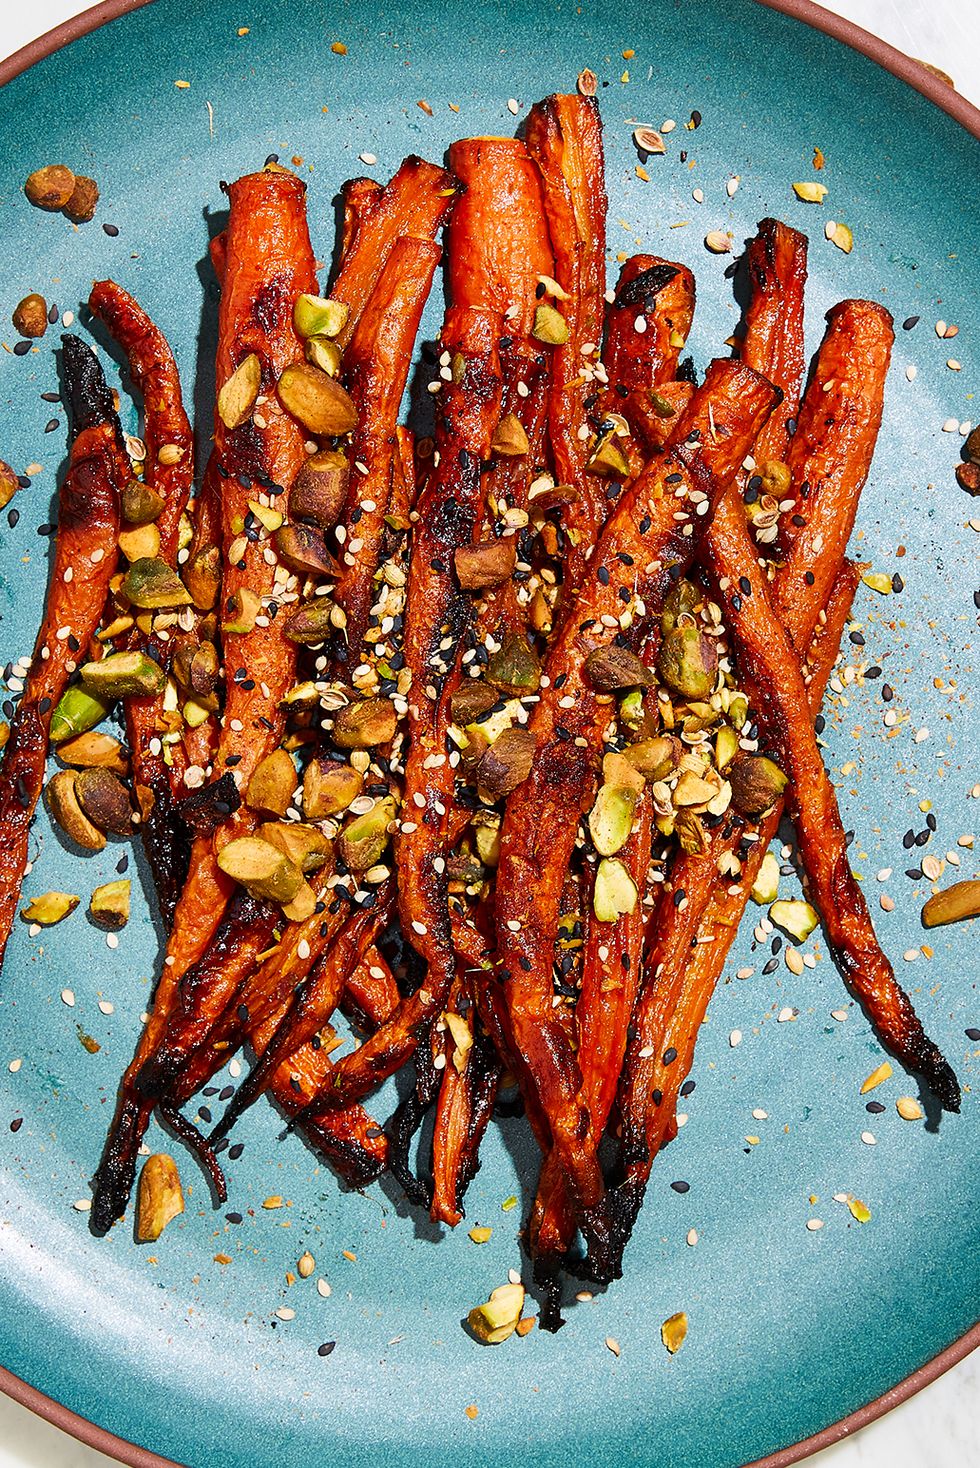 miso glazed carrots topped with pistachios and white and black sesame seeds on a teal plate